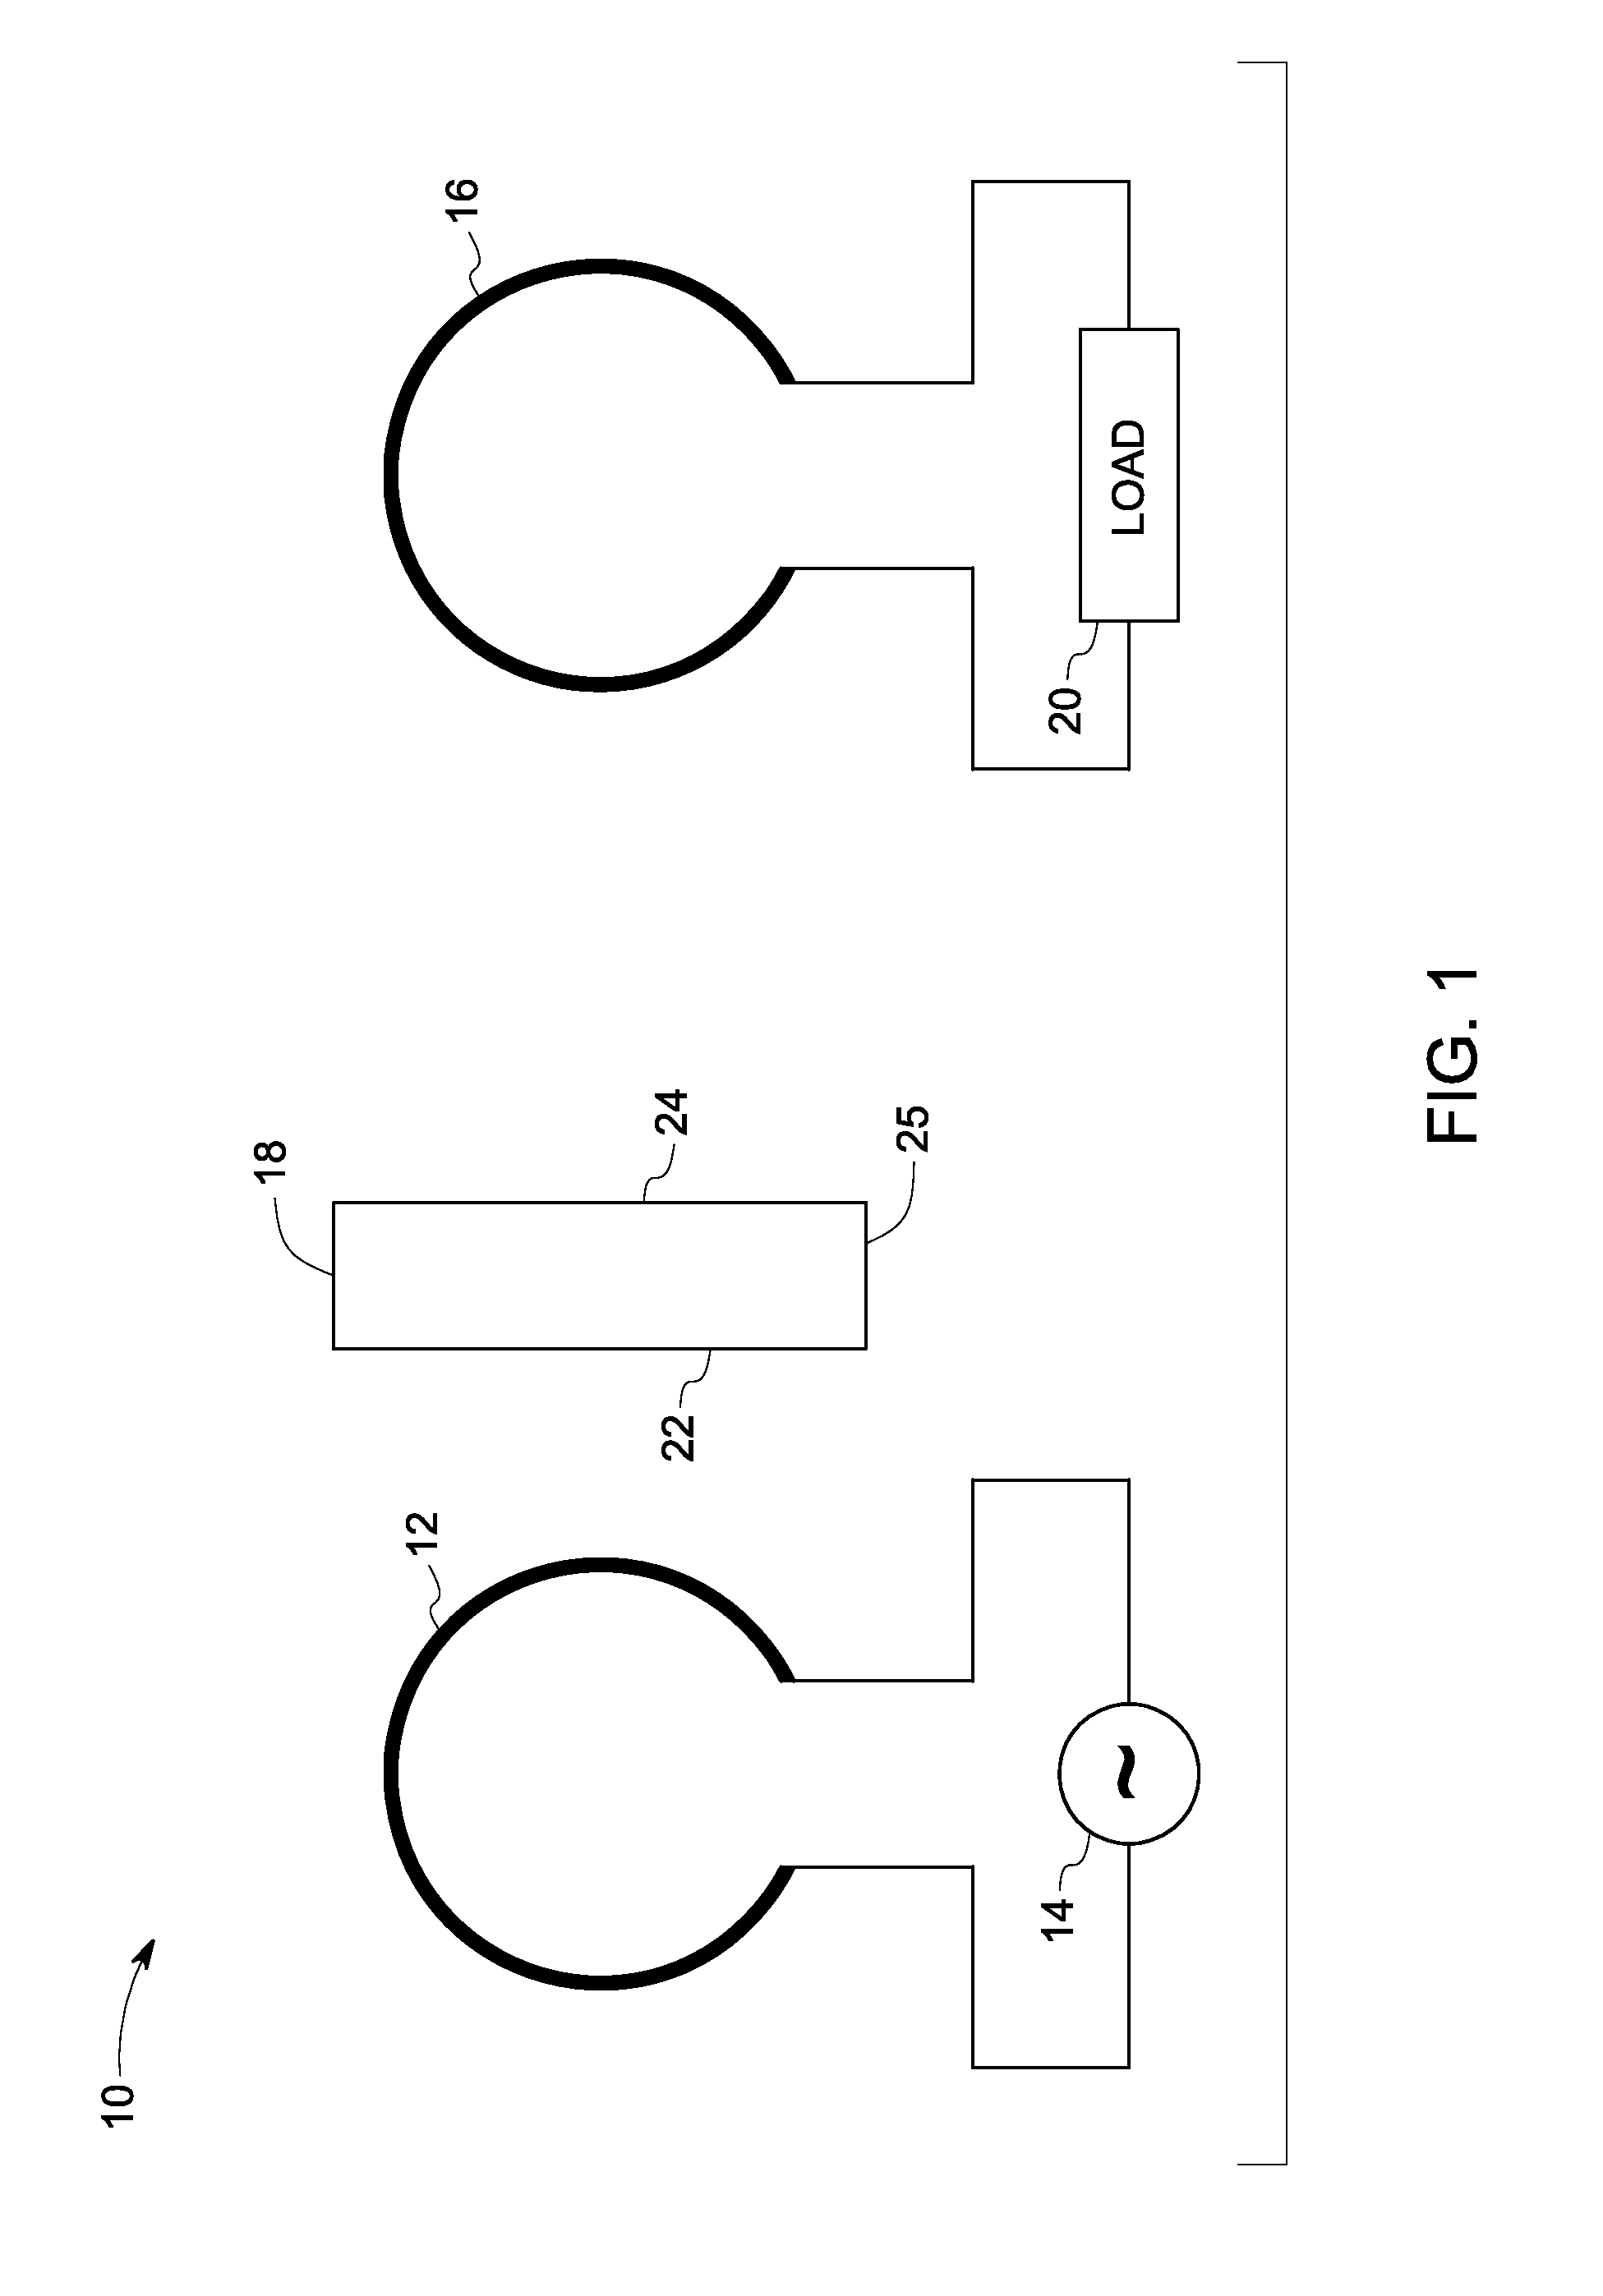 Resonator structures and method of making